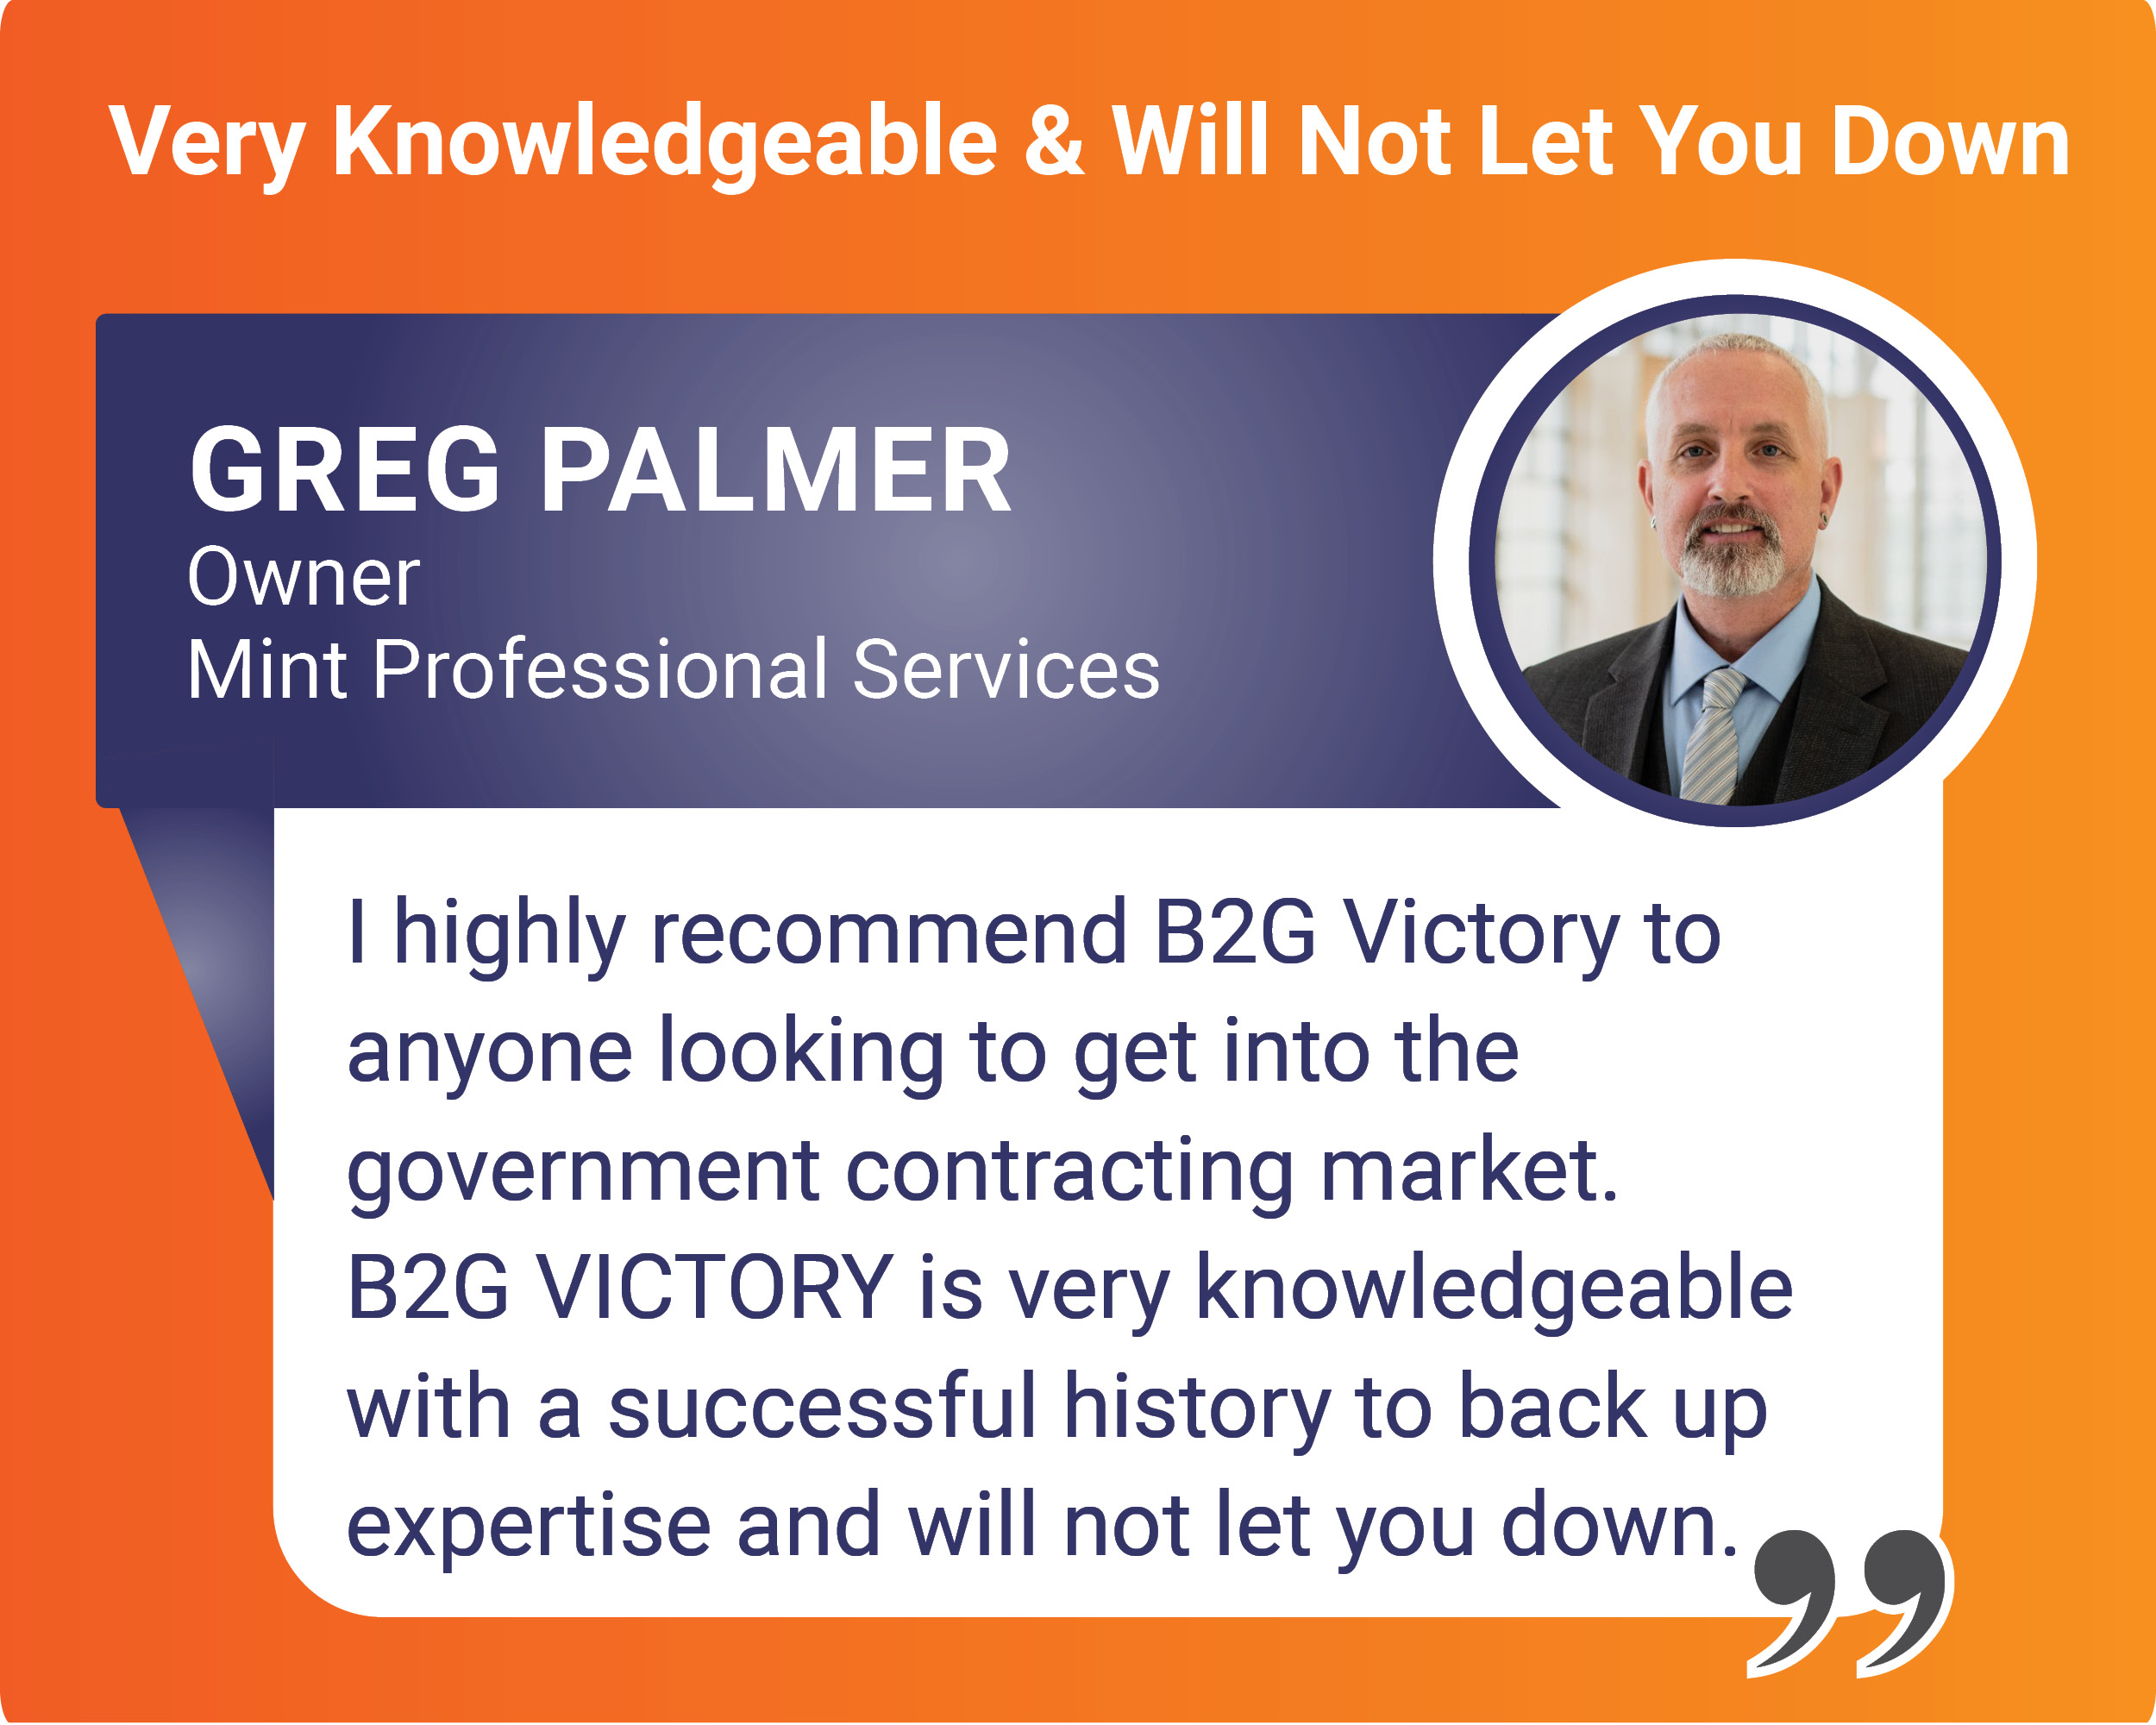 Testimonial from Greg Palmer of Mint Professional Services